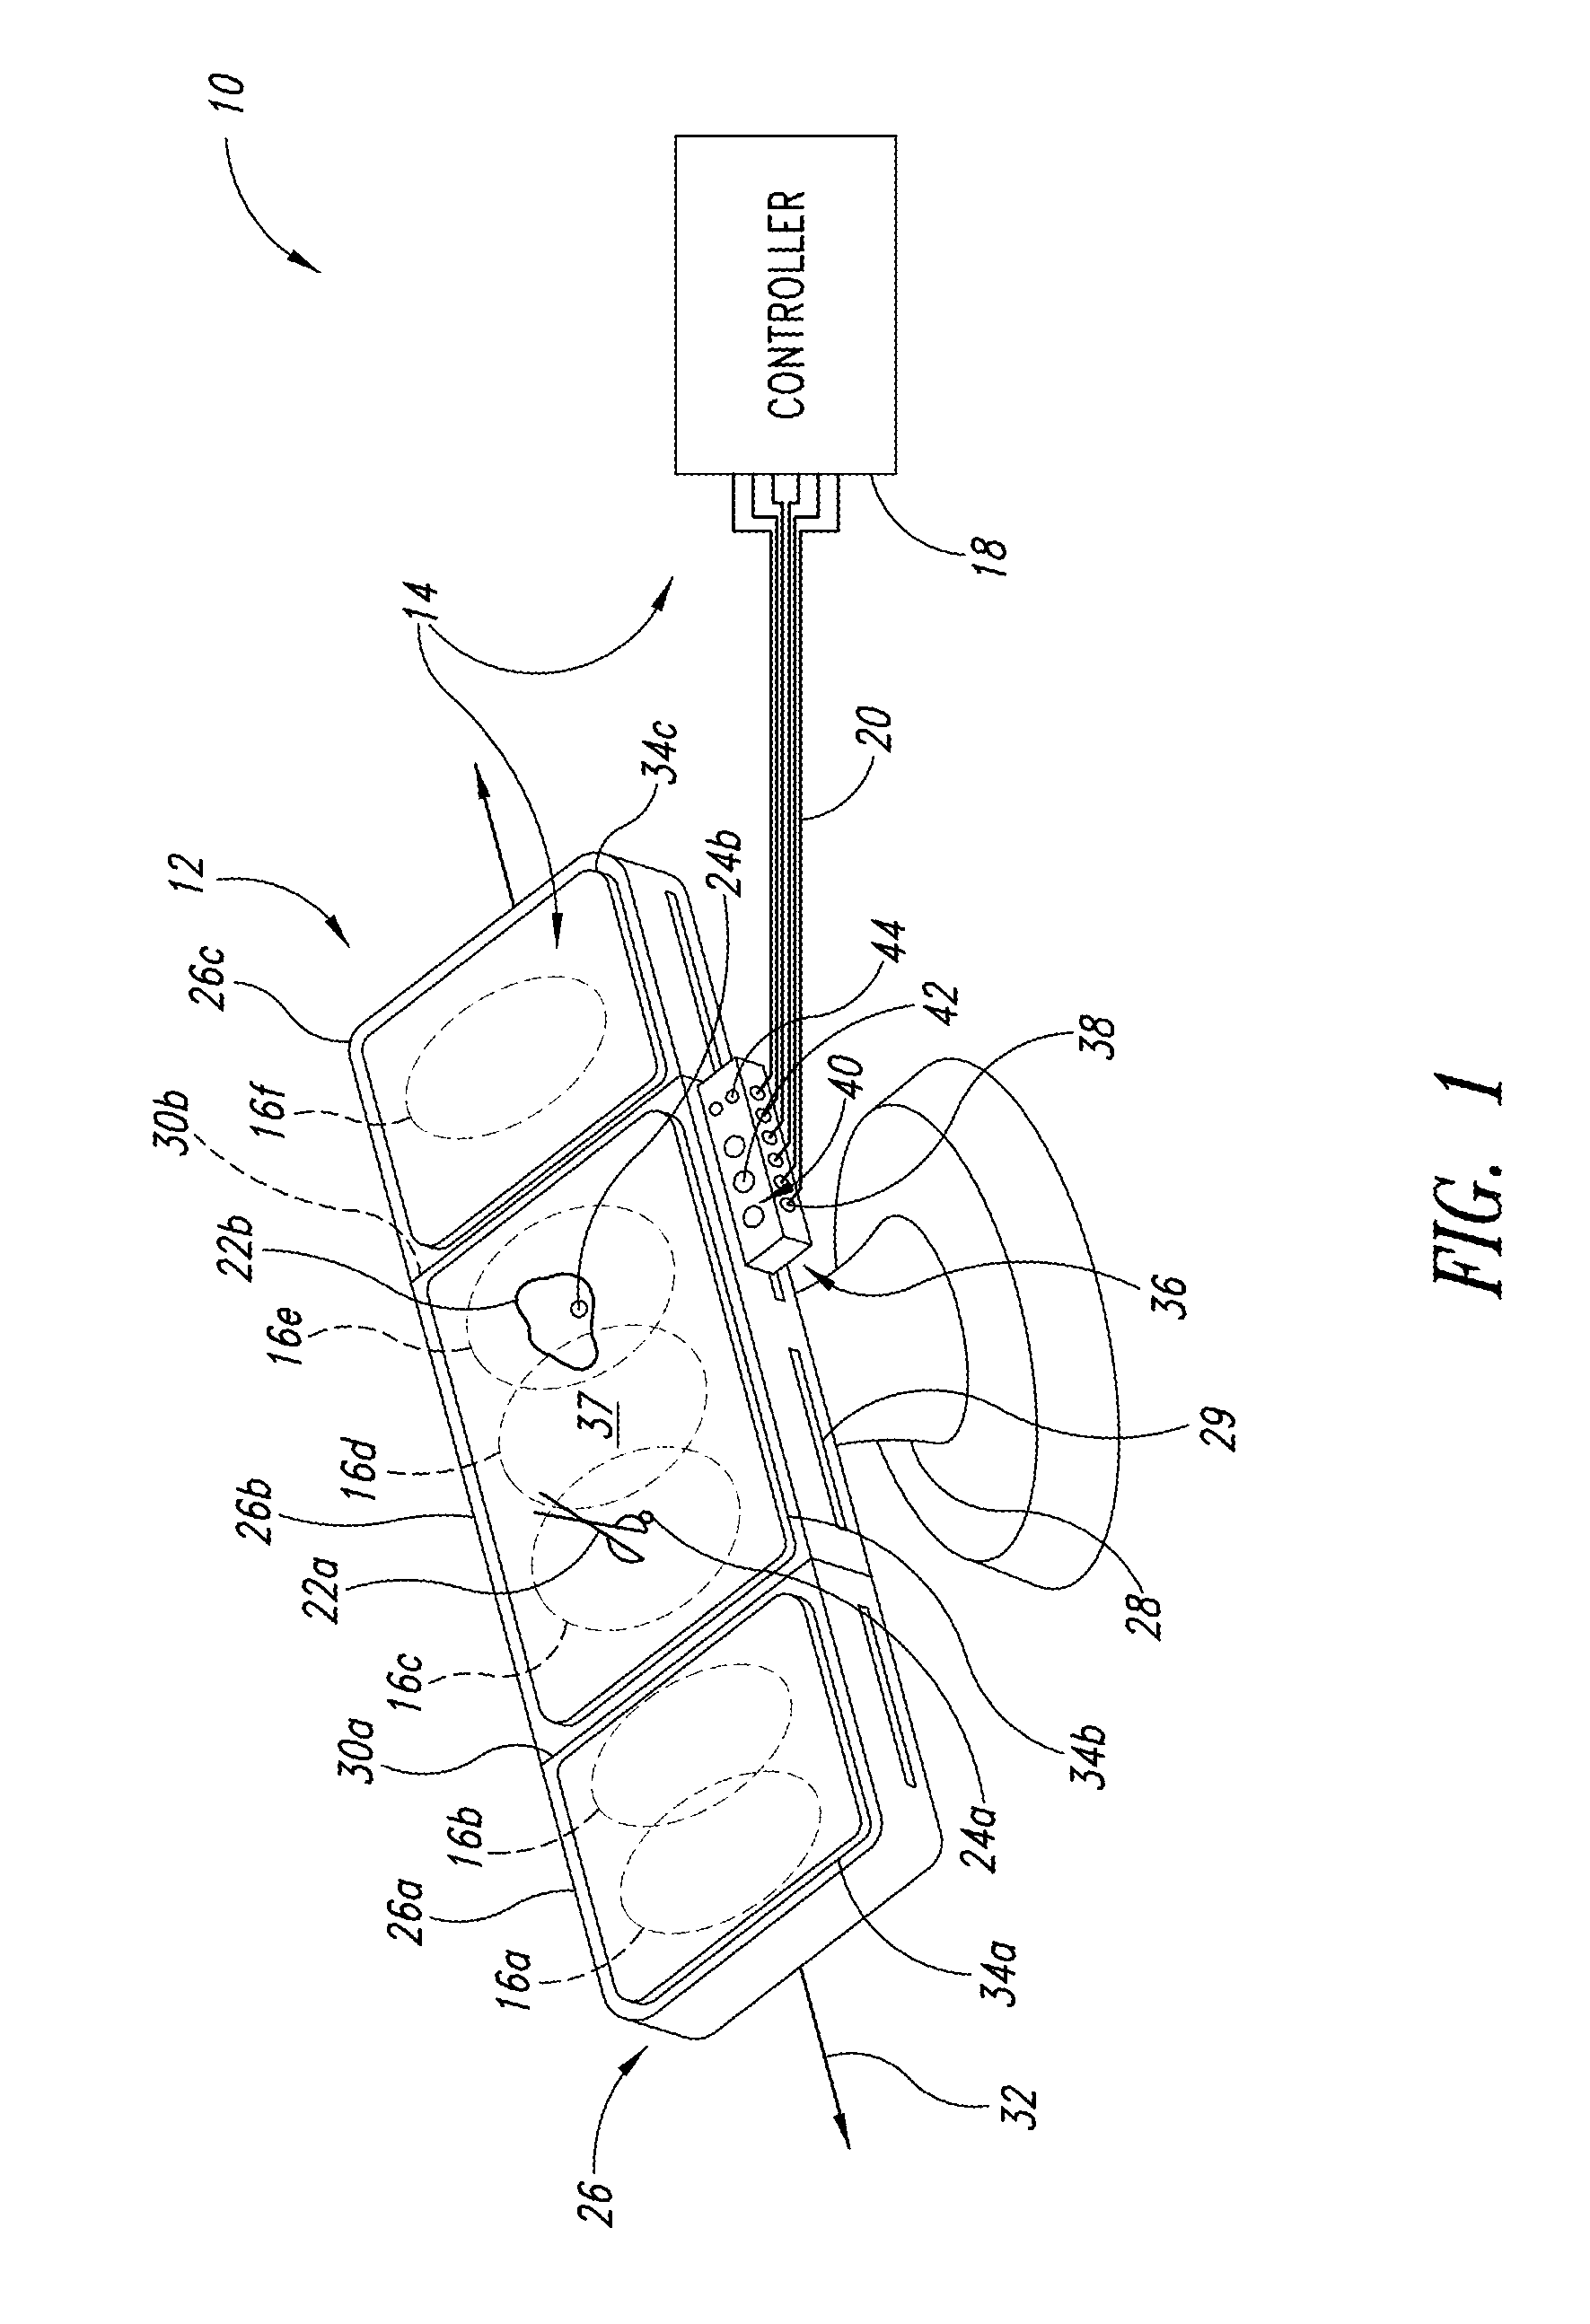 Method and apparatus to detect transponder tagged objects, for example during medical procedures